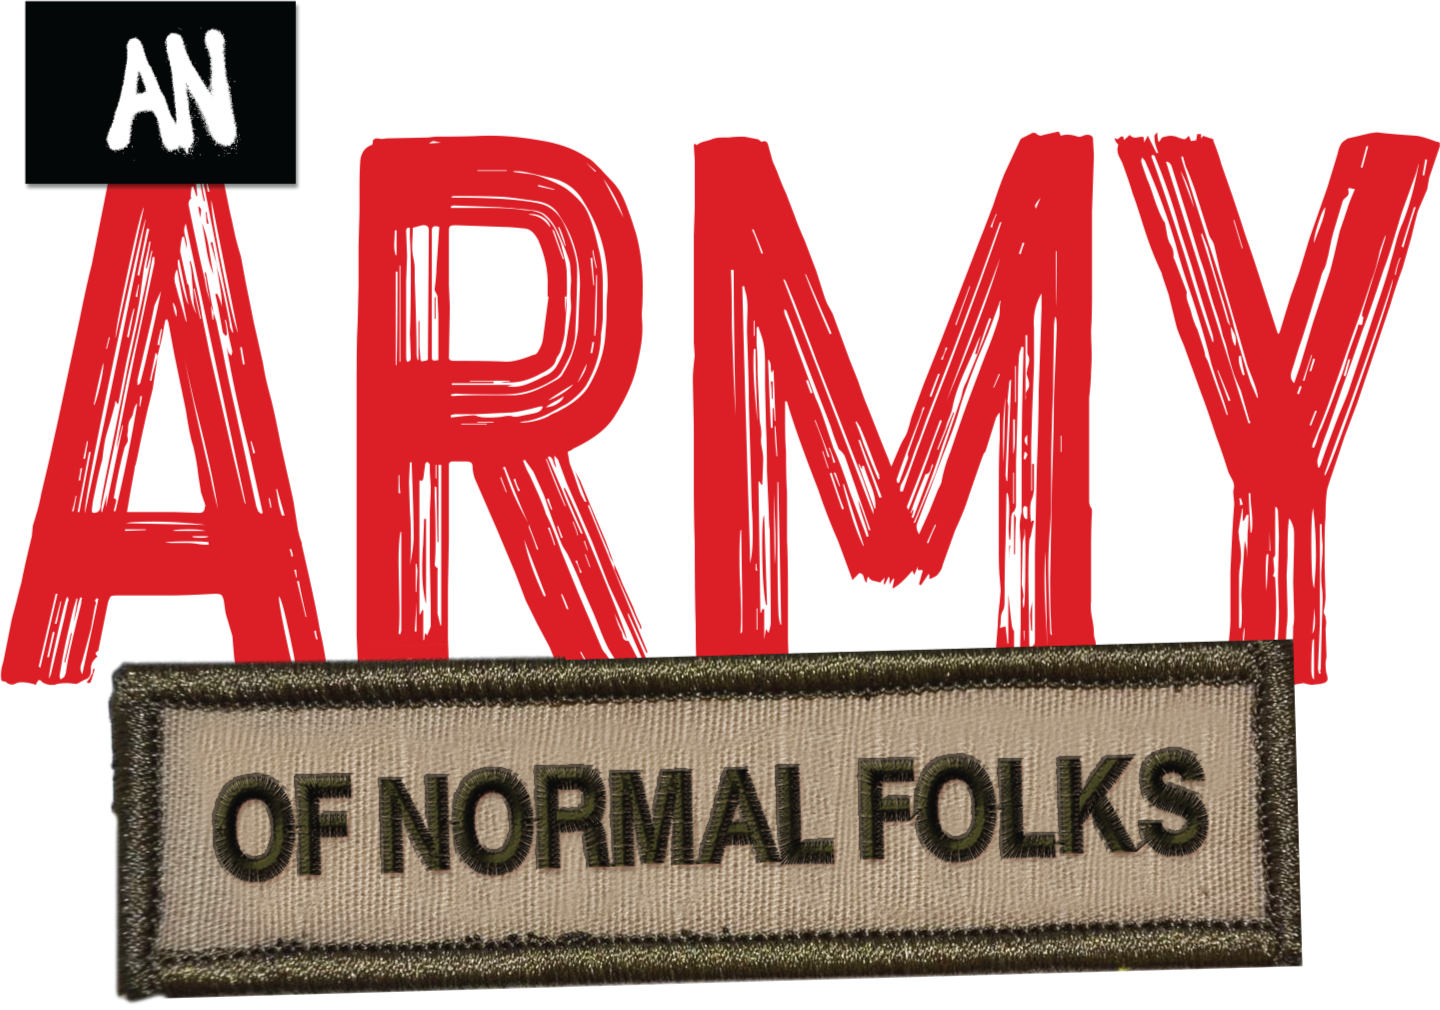 An Army of Normal Folks